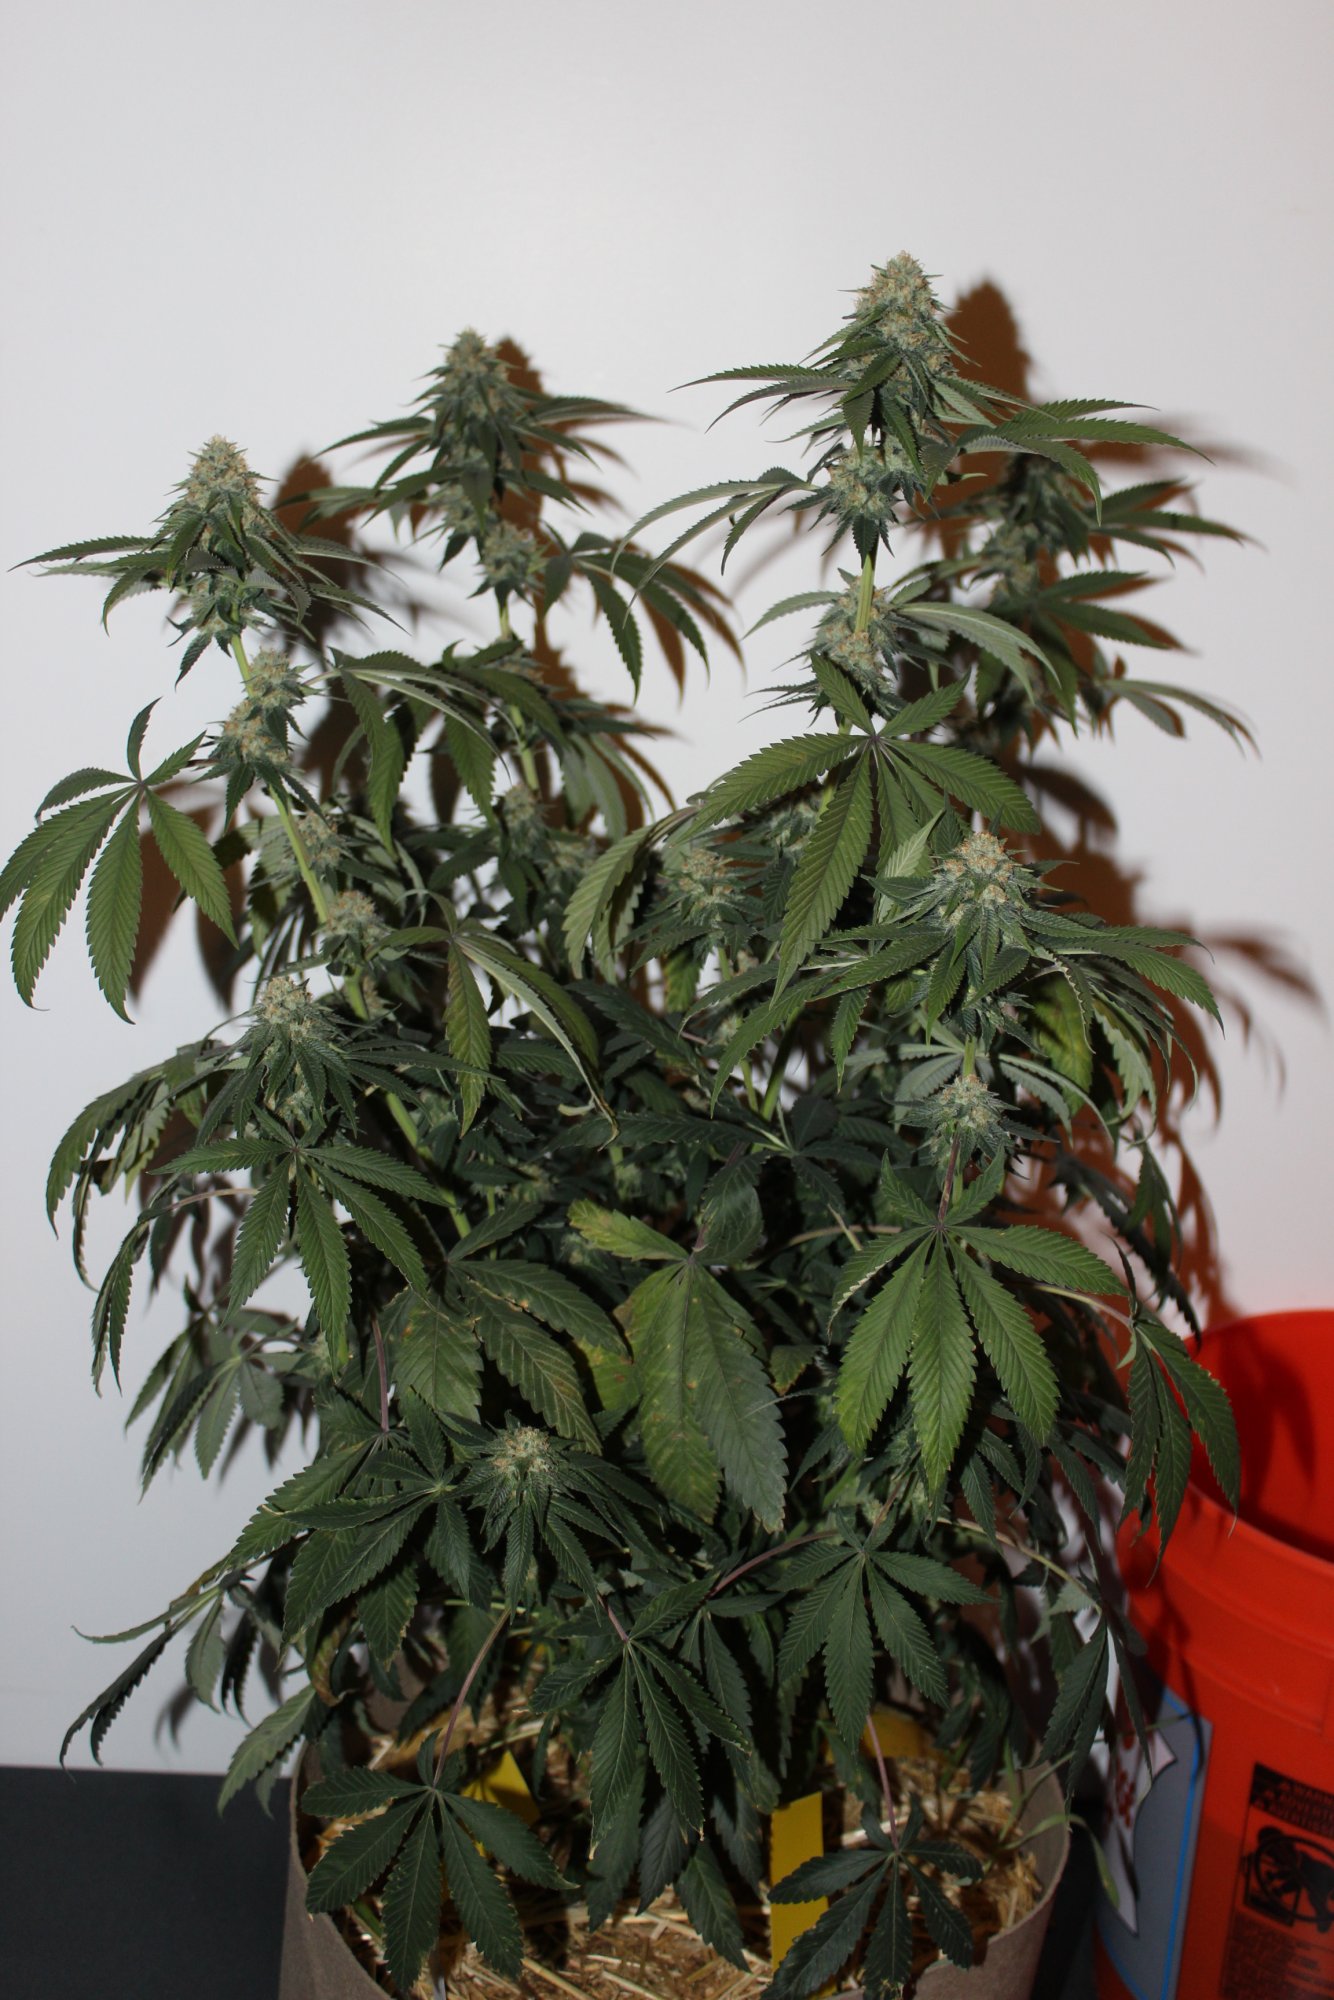 Time Bandit 3 flower day 33